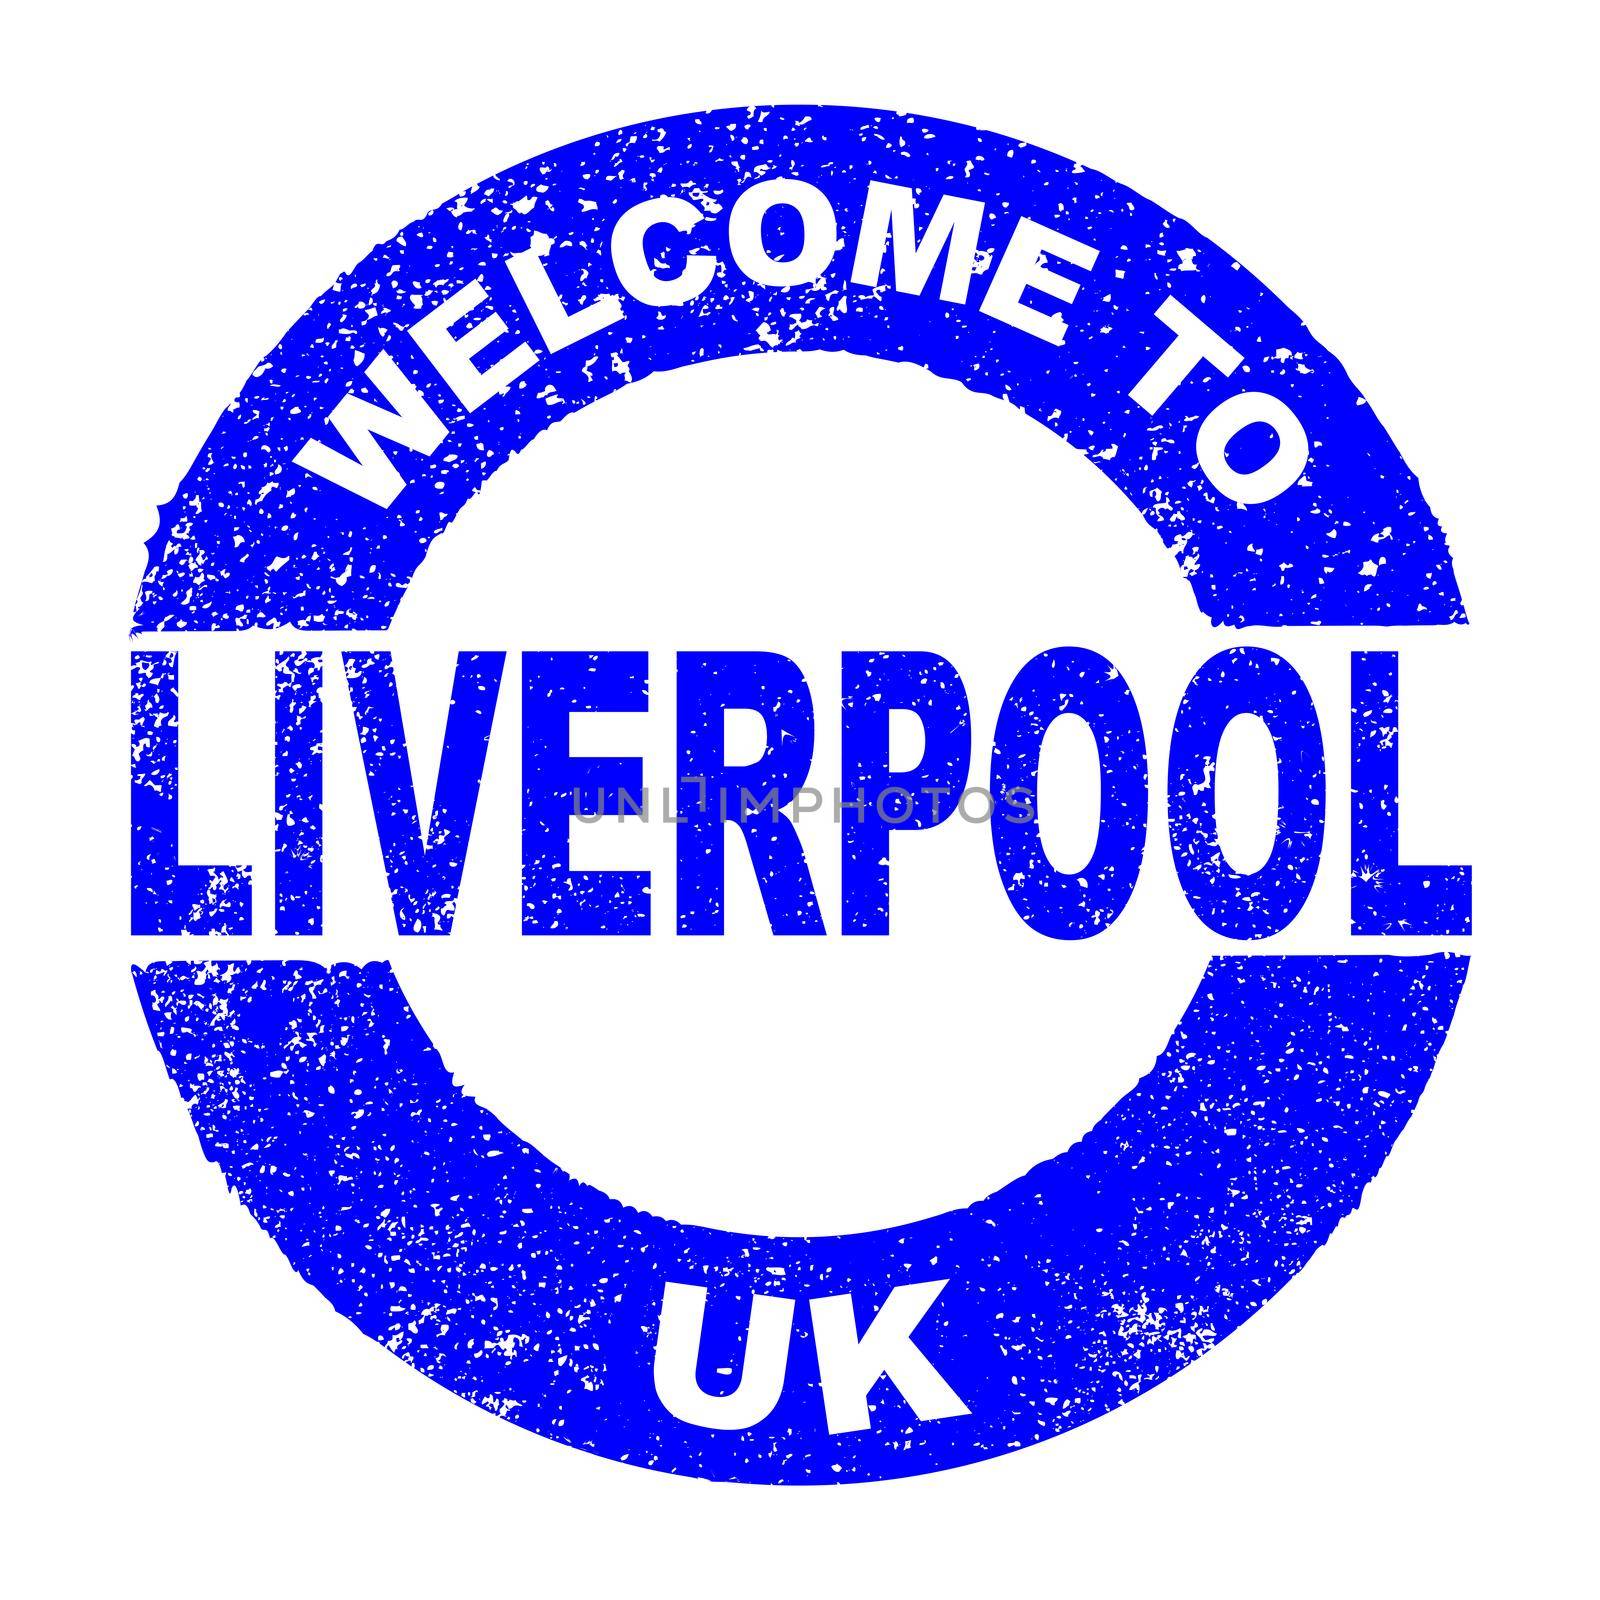 A grunge rubber ink stamp with the text Welcome To Liverpool UK over a white background